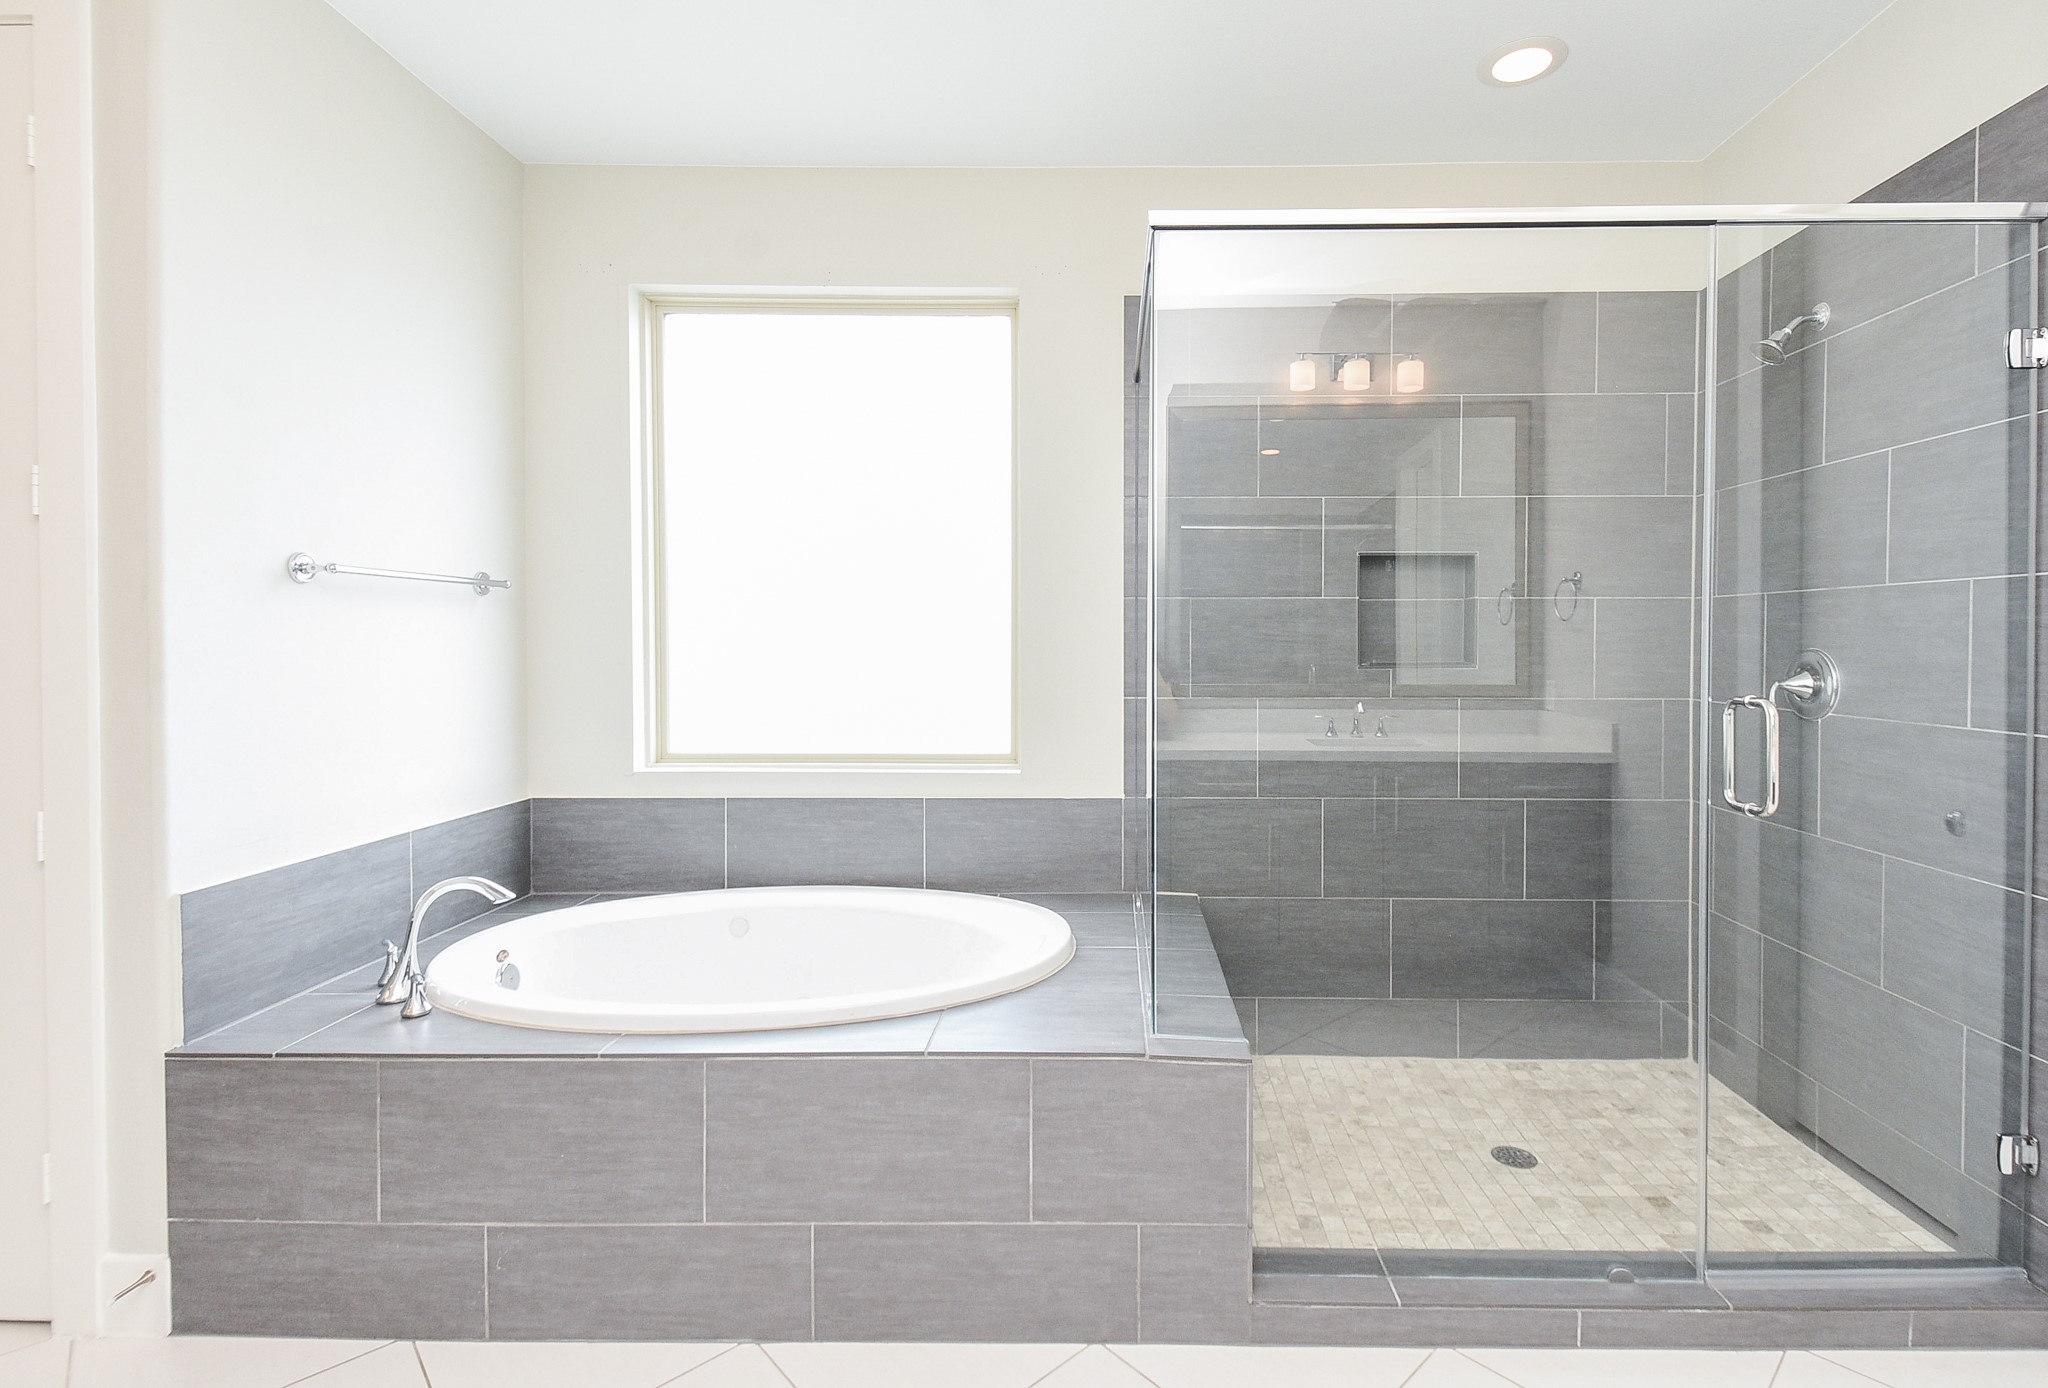 Your primary ensuite bath is just beyond the double doors, left.